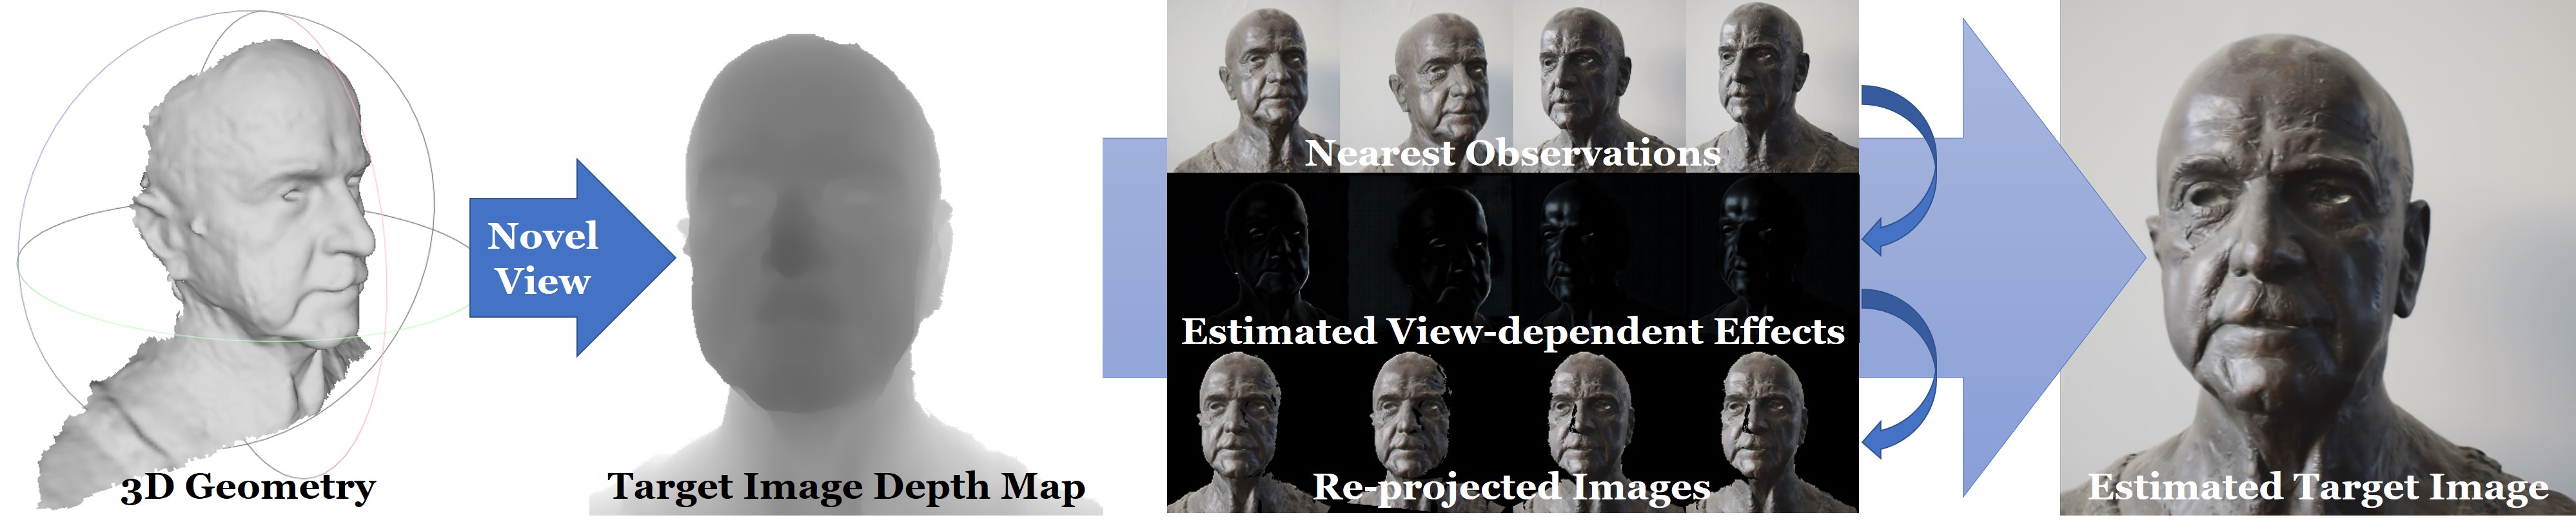 Image-guided Neural Object Rendering